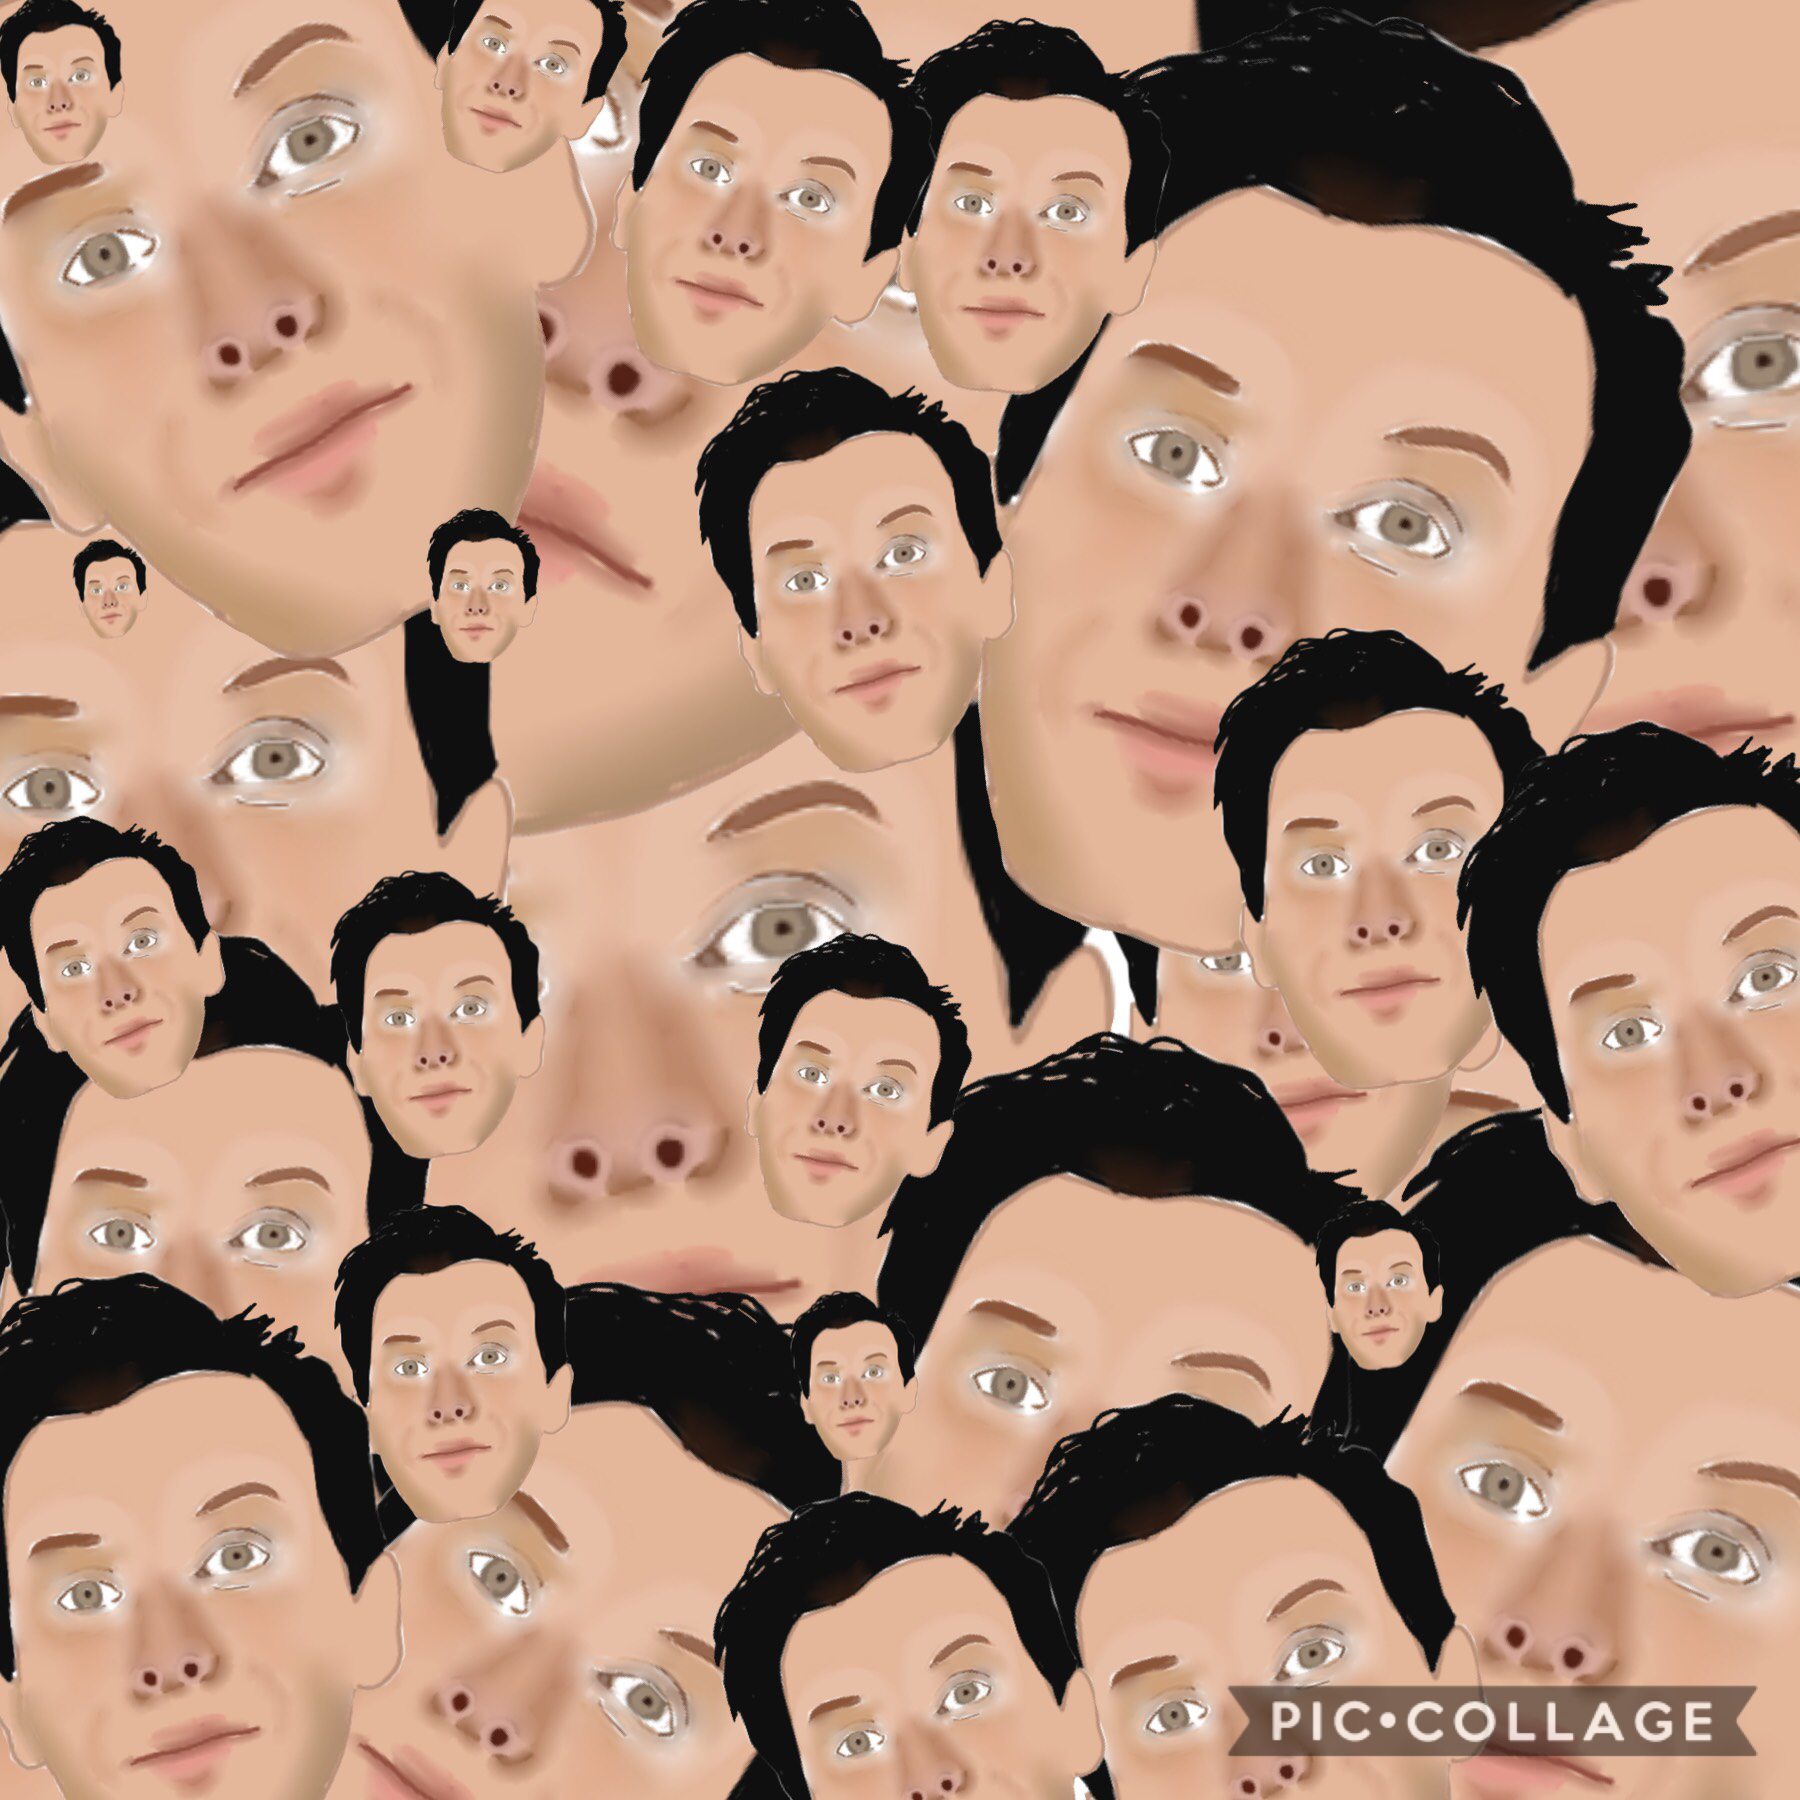 I drew Phil and cut it out to make this